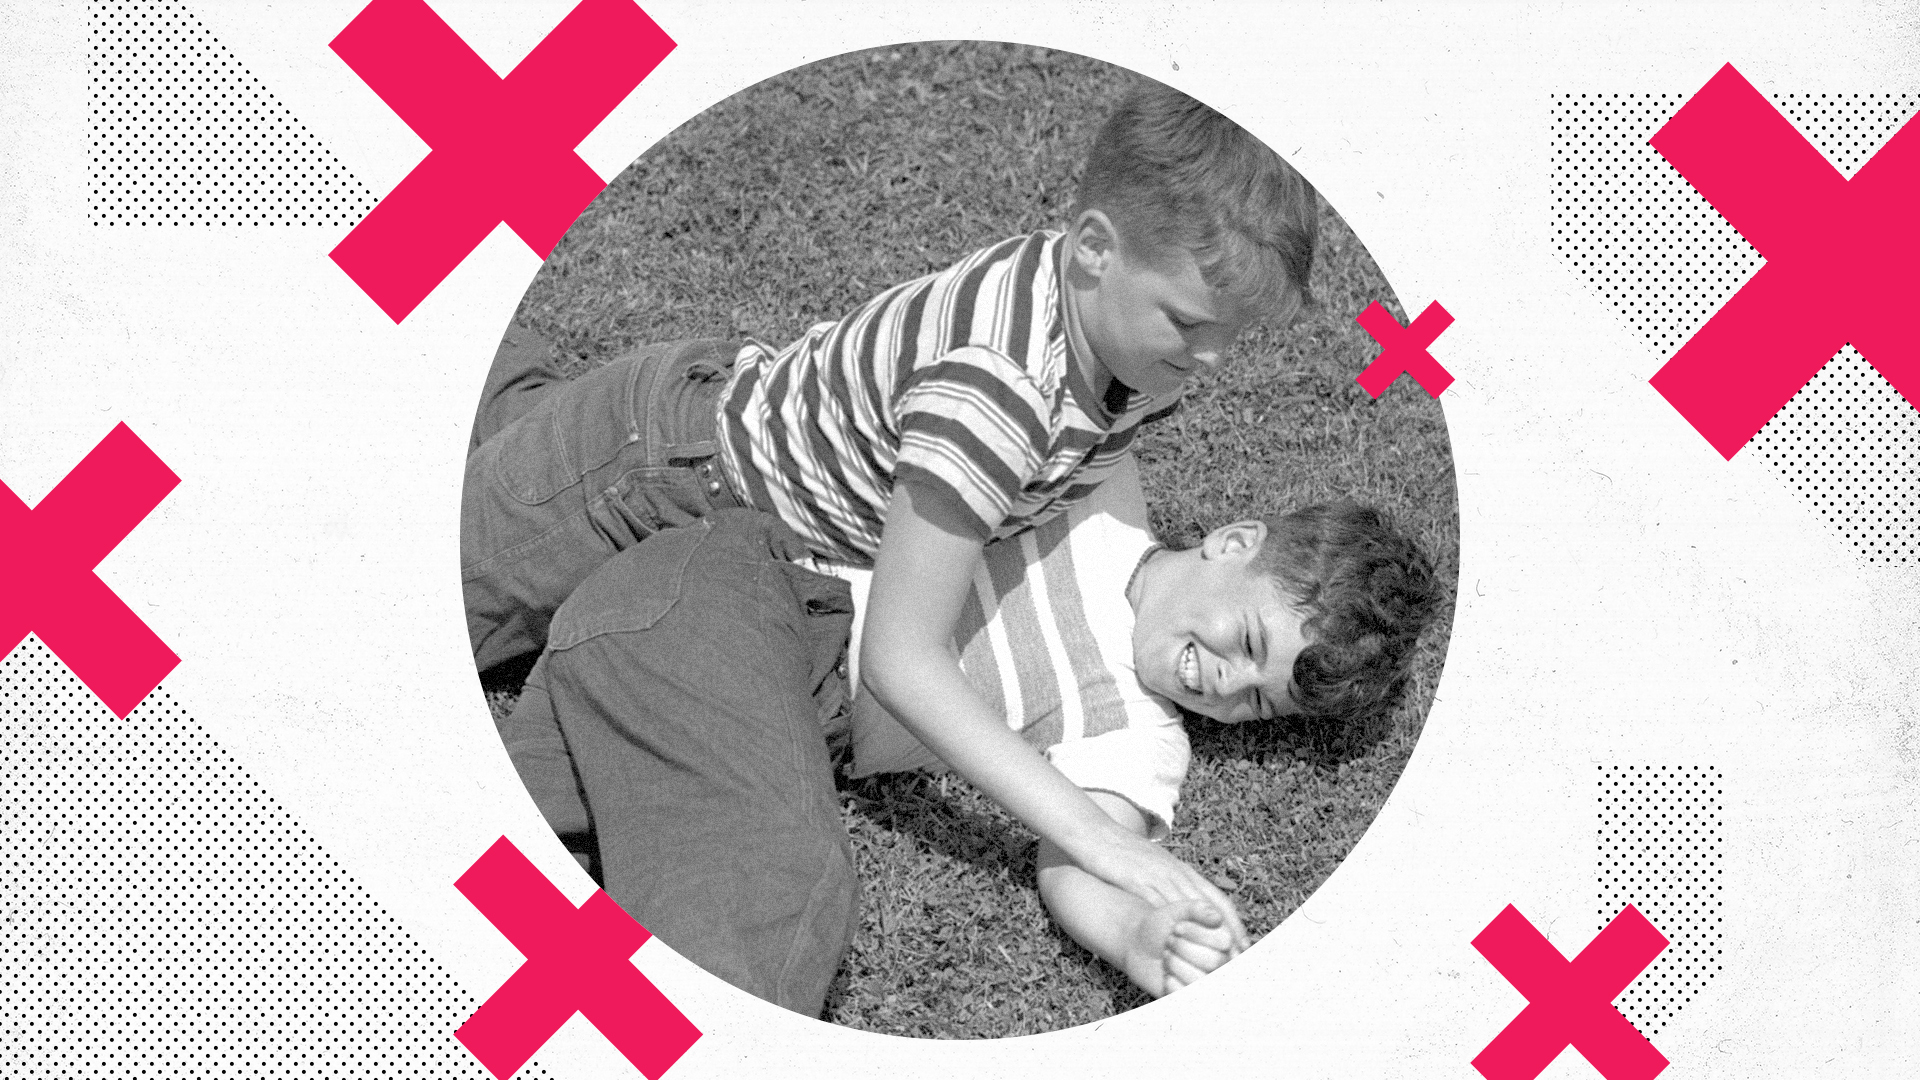 Two young kids wrestling on top of each other. A red X pattern surrounds the photo.